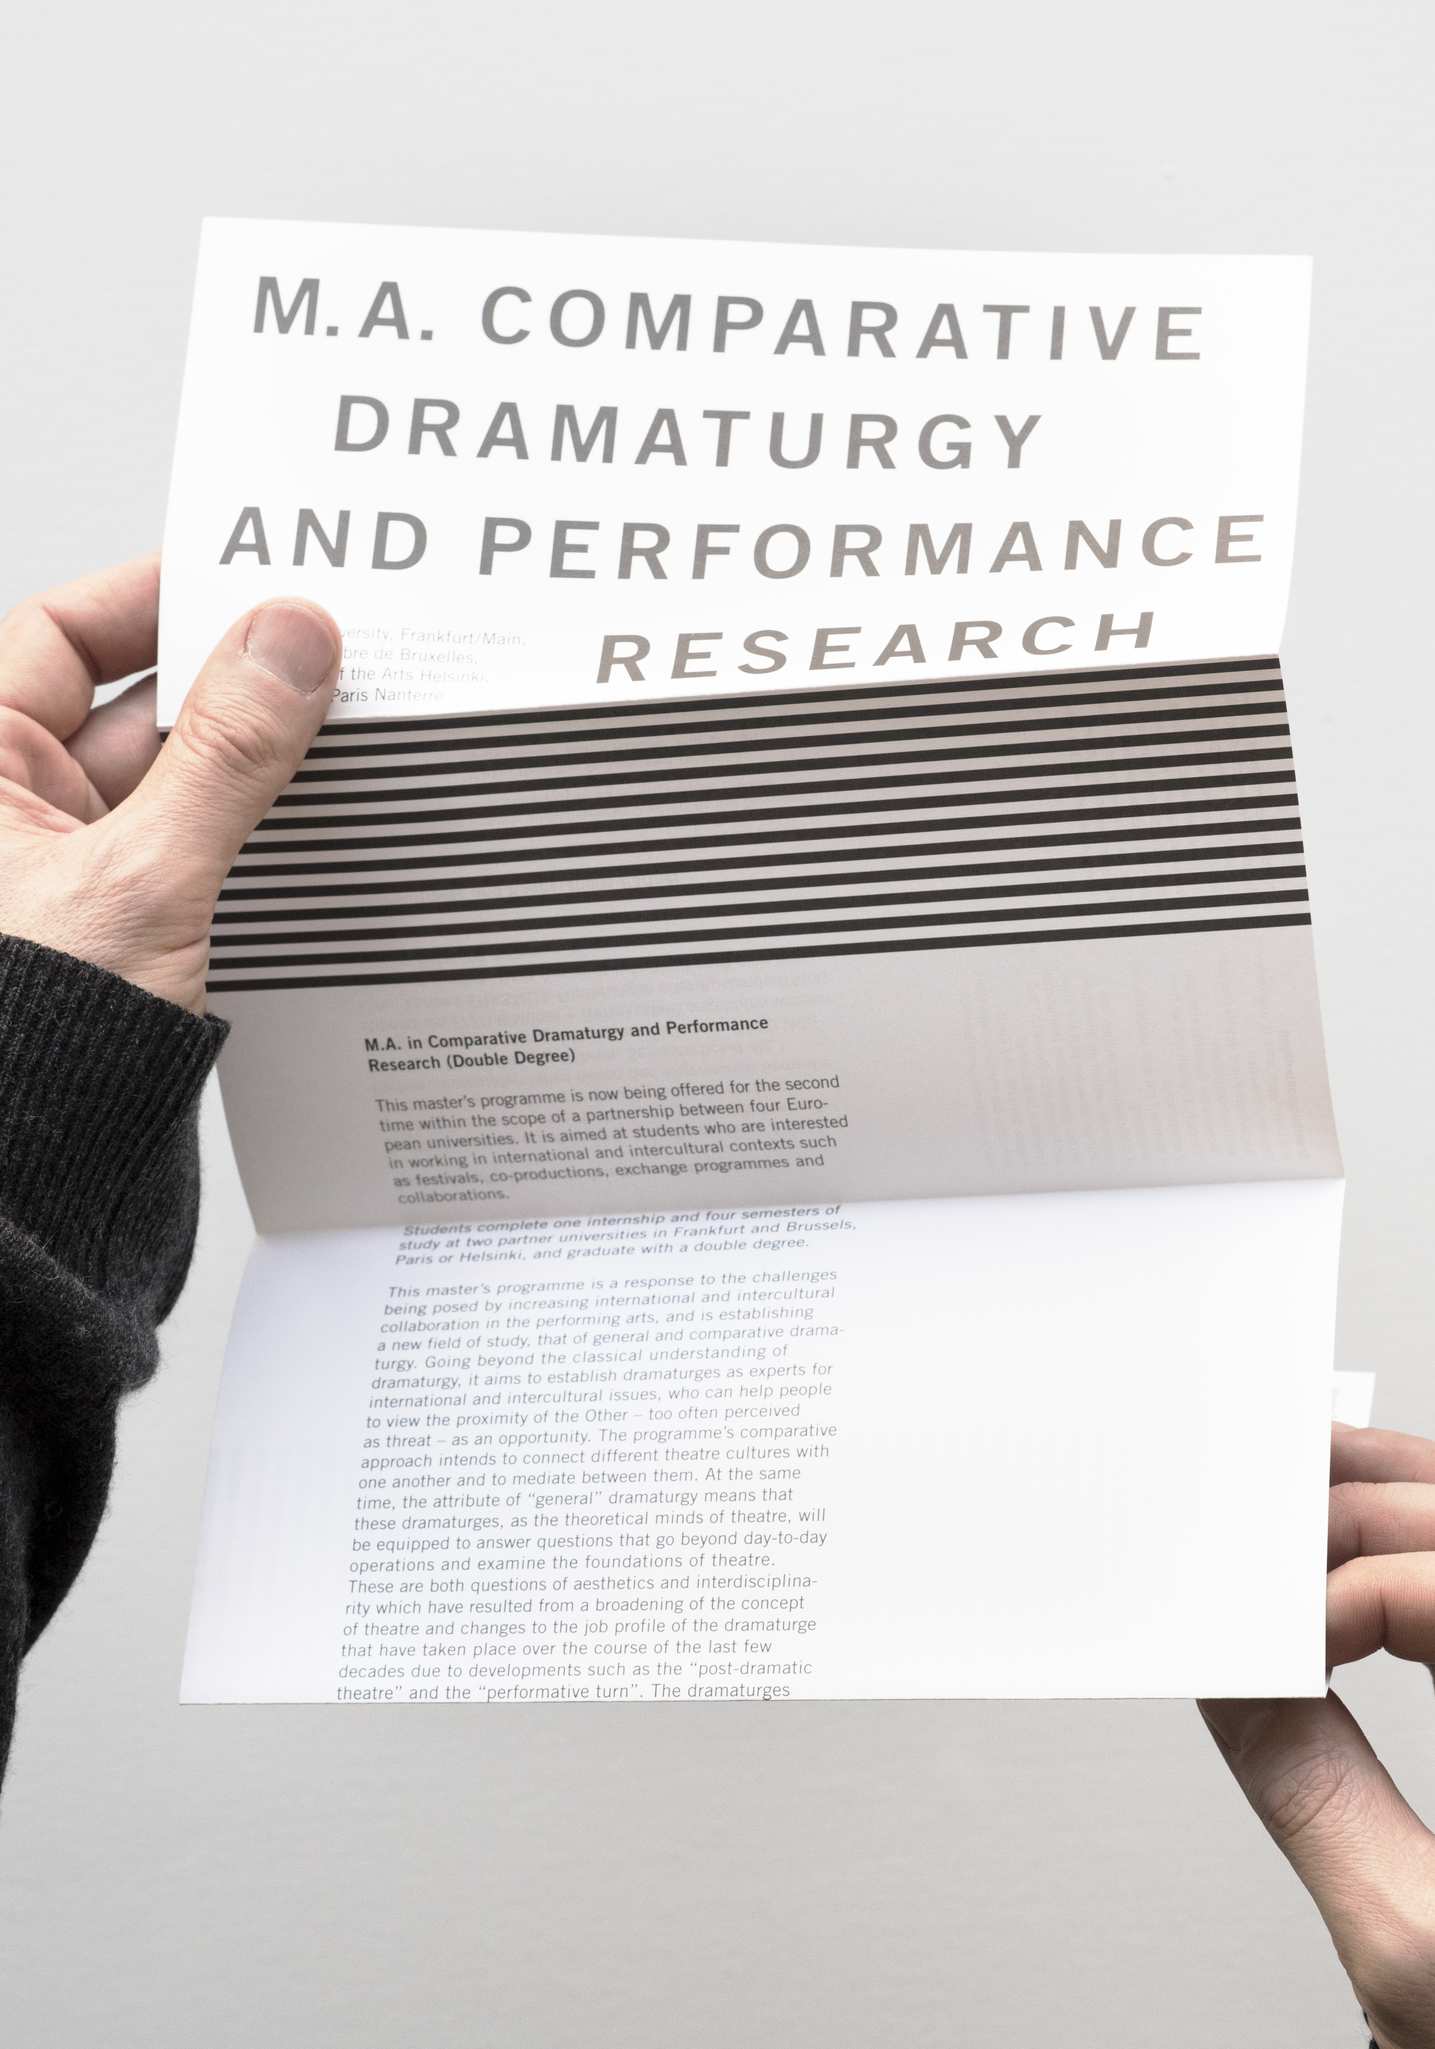 ma-comparative-dramaturgy-and-performance-research-flyer-2-1435x2049px